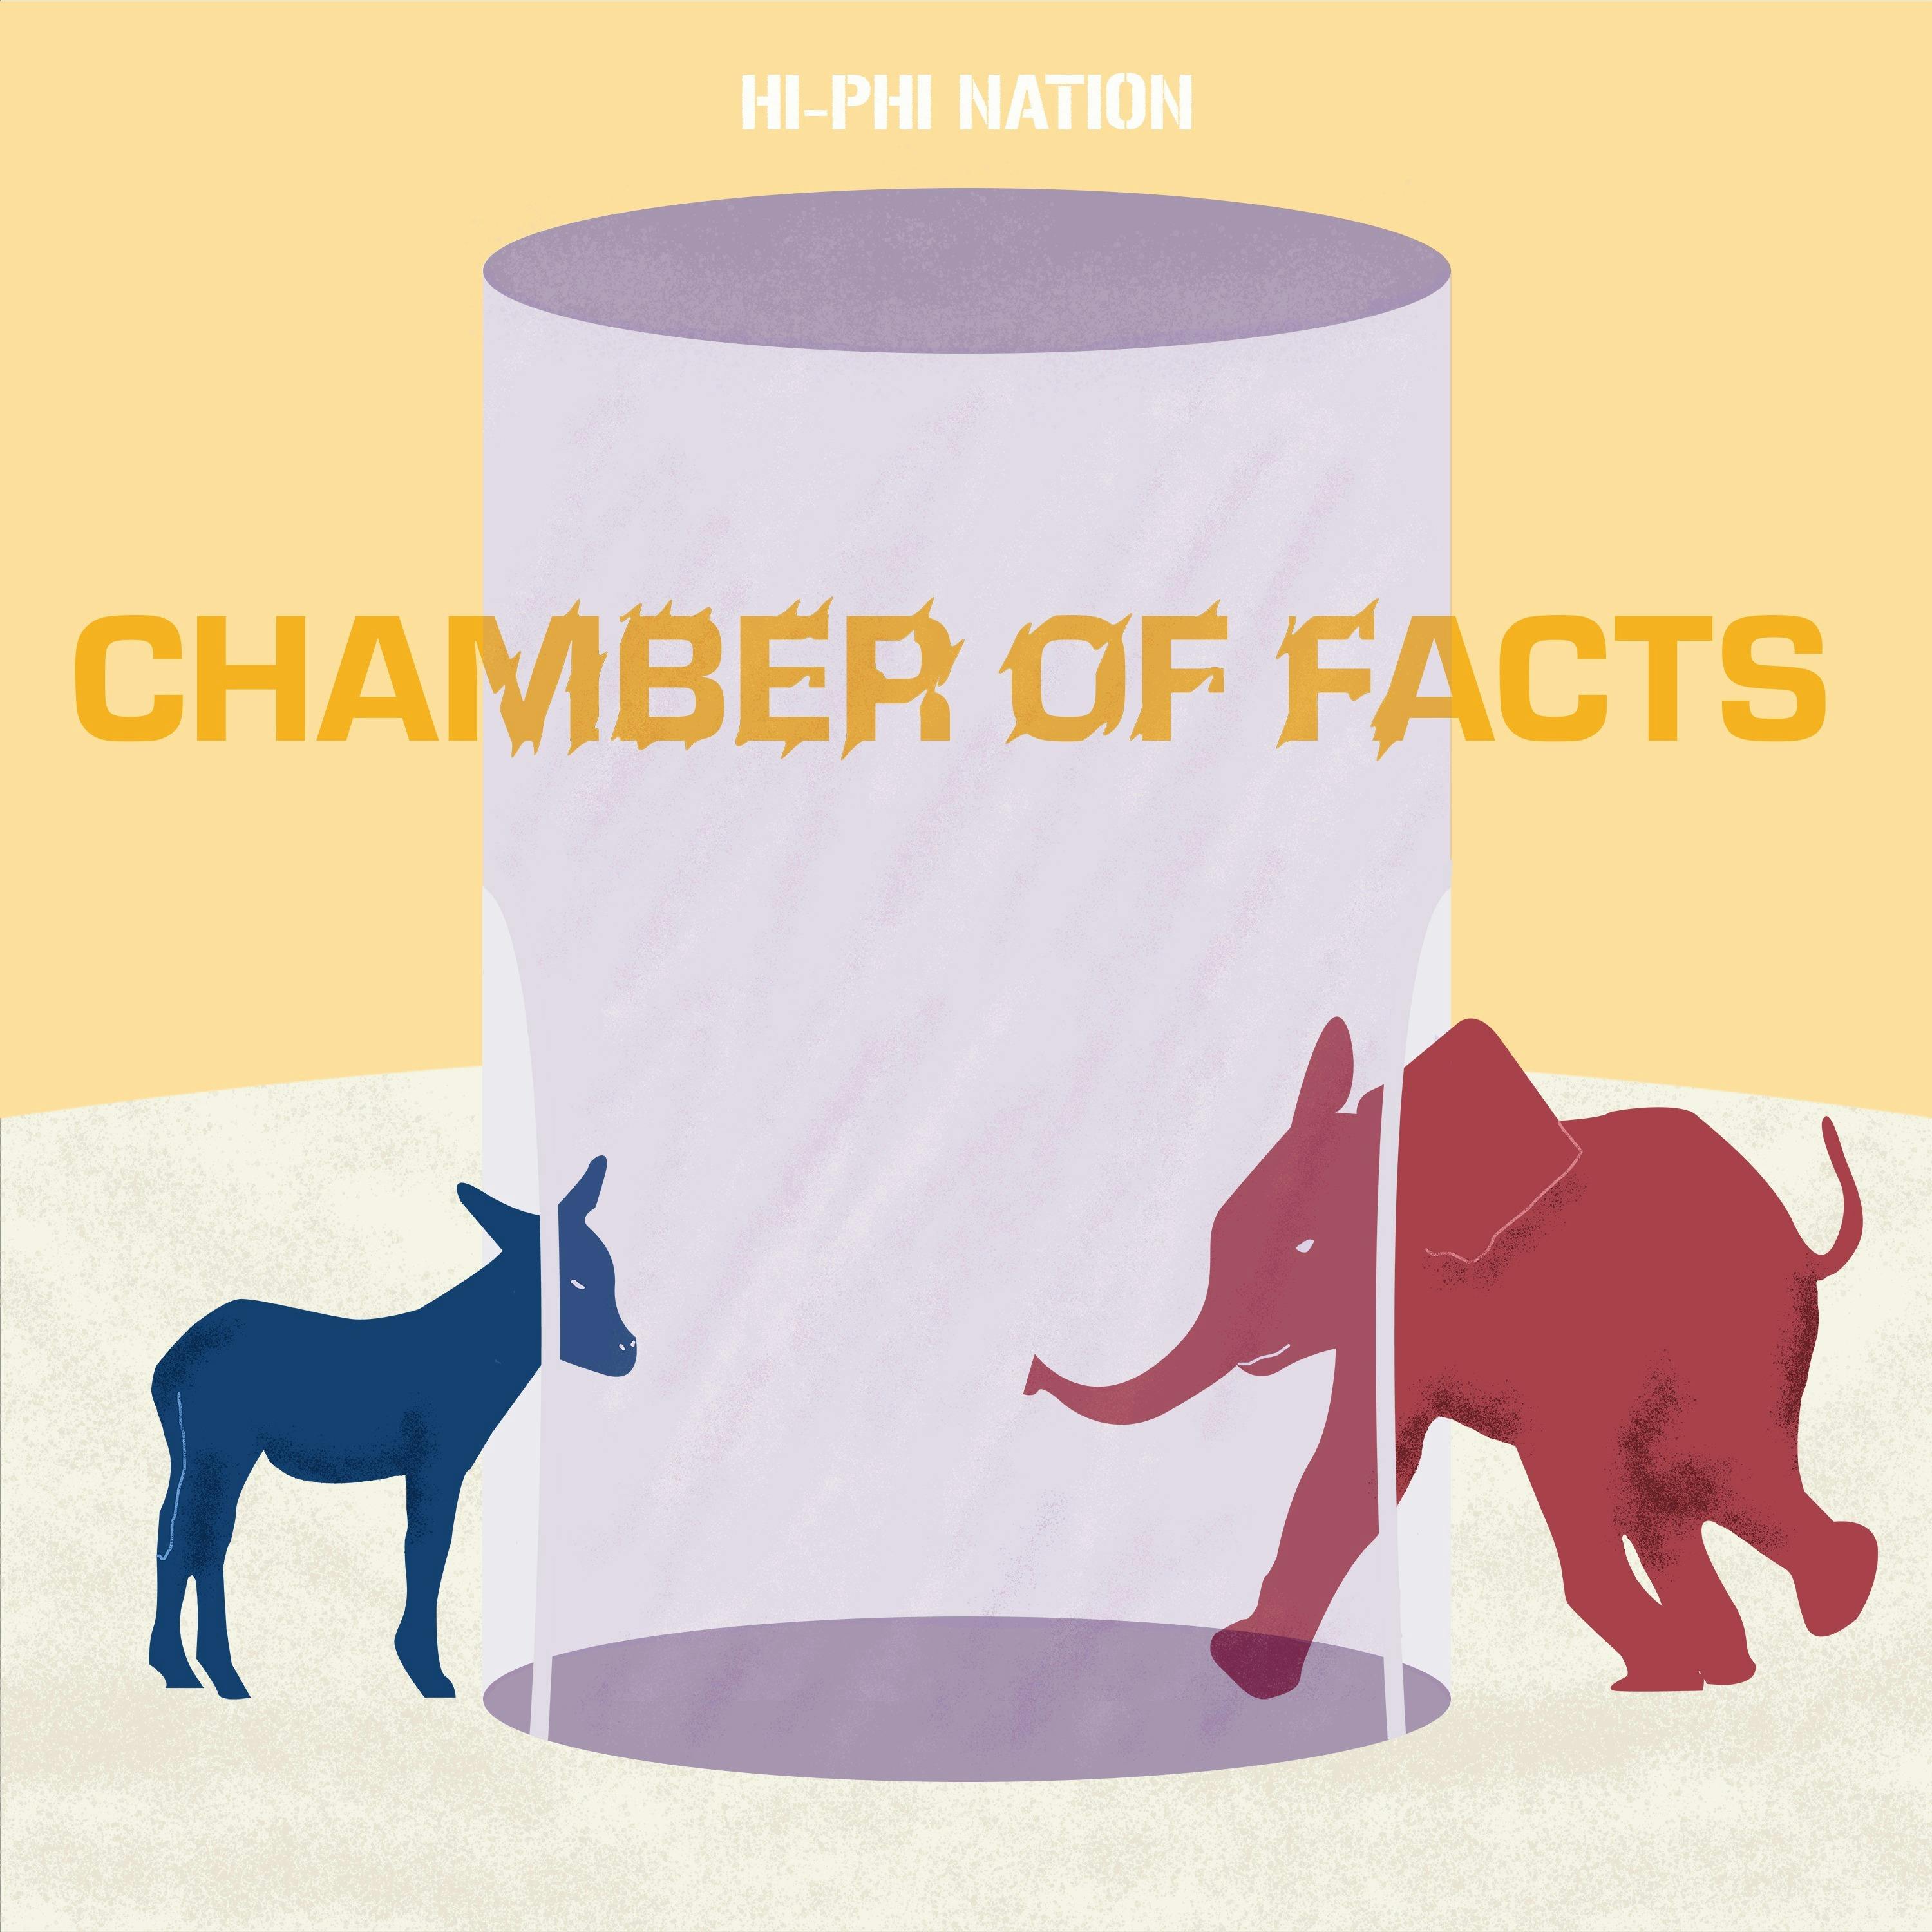 Chamber of Facts